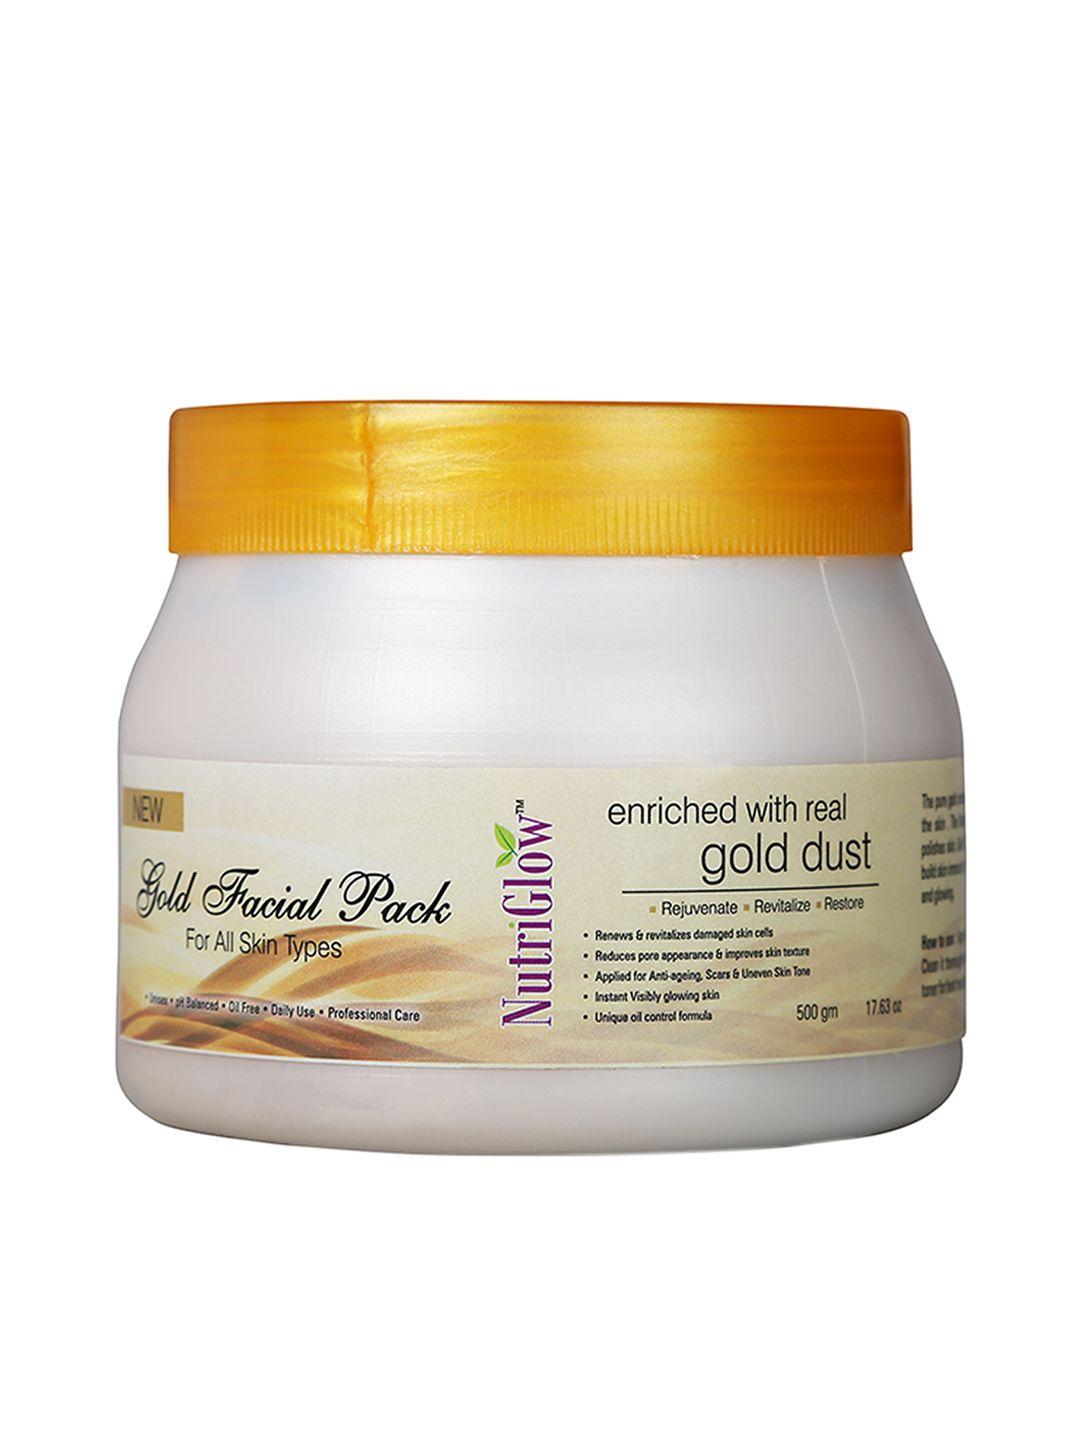 nutriglow luster gold facial pack for all skin types - 500g